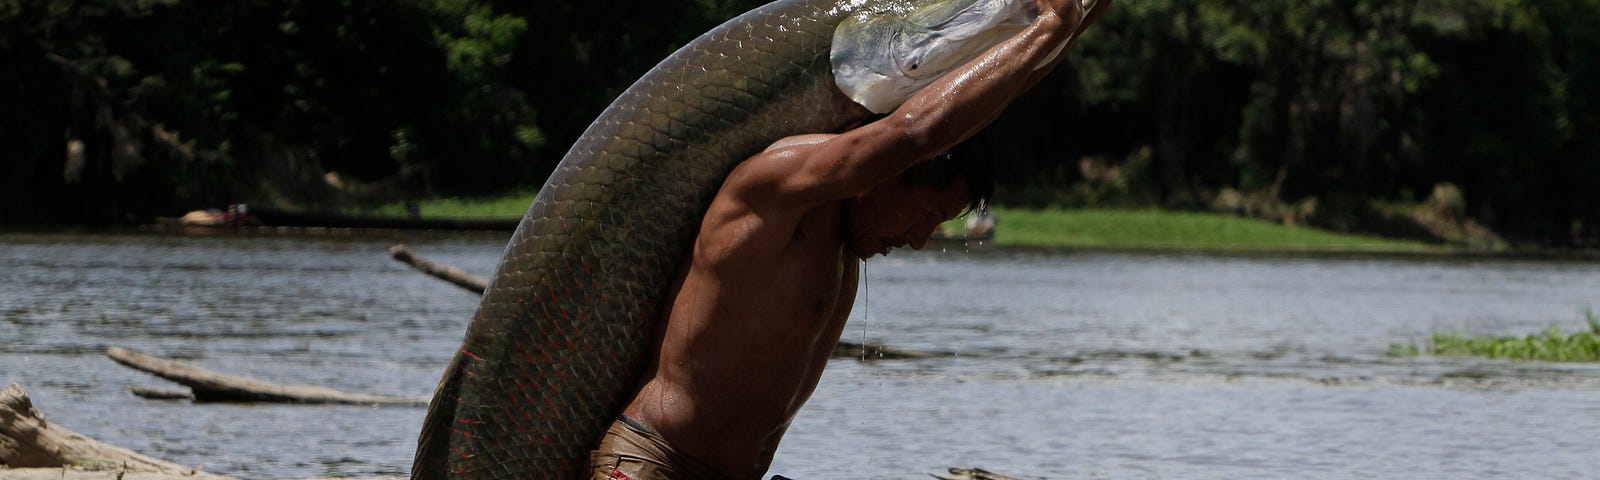 An Amazonian fisherman lifts an immense pirarucu, a symbol of sustainable fishing in the region. Responsible management of this species is crucial for the preservation of aquatic ecosystems and the subsistence of local communities.